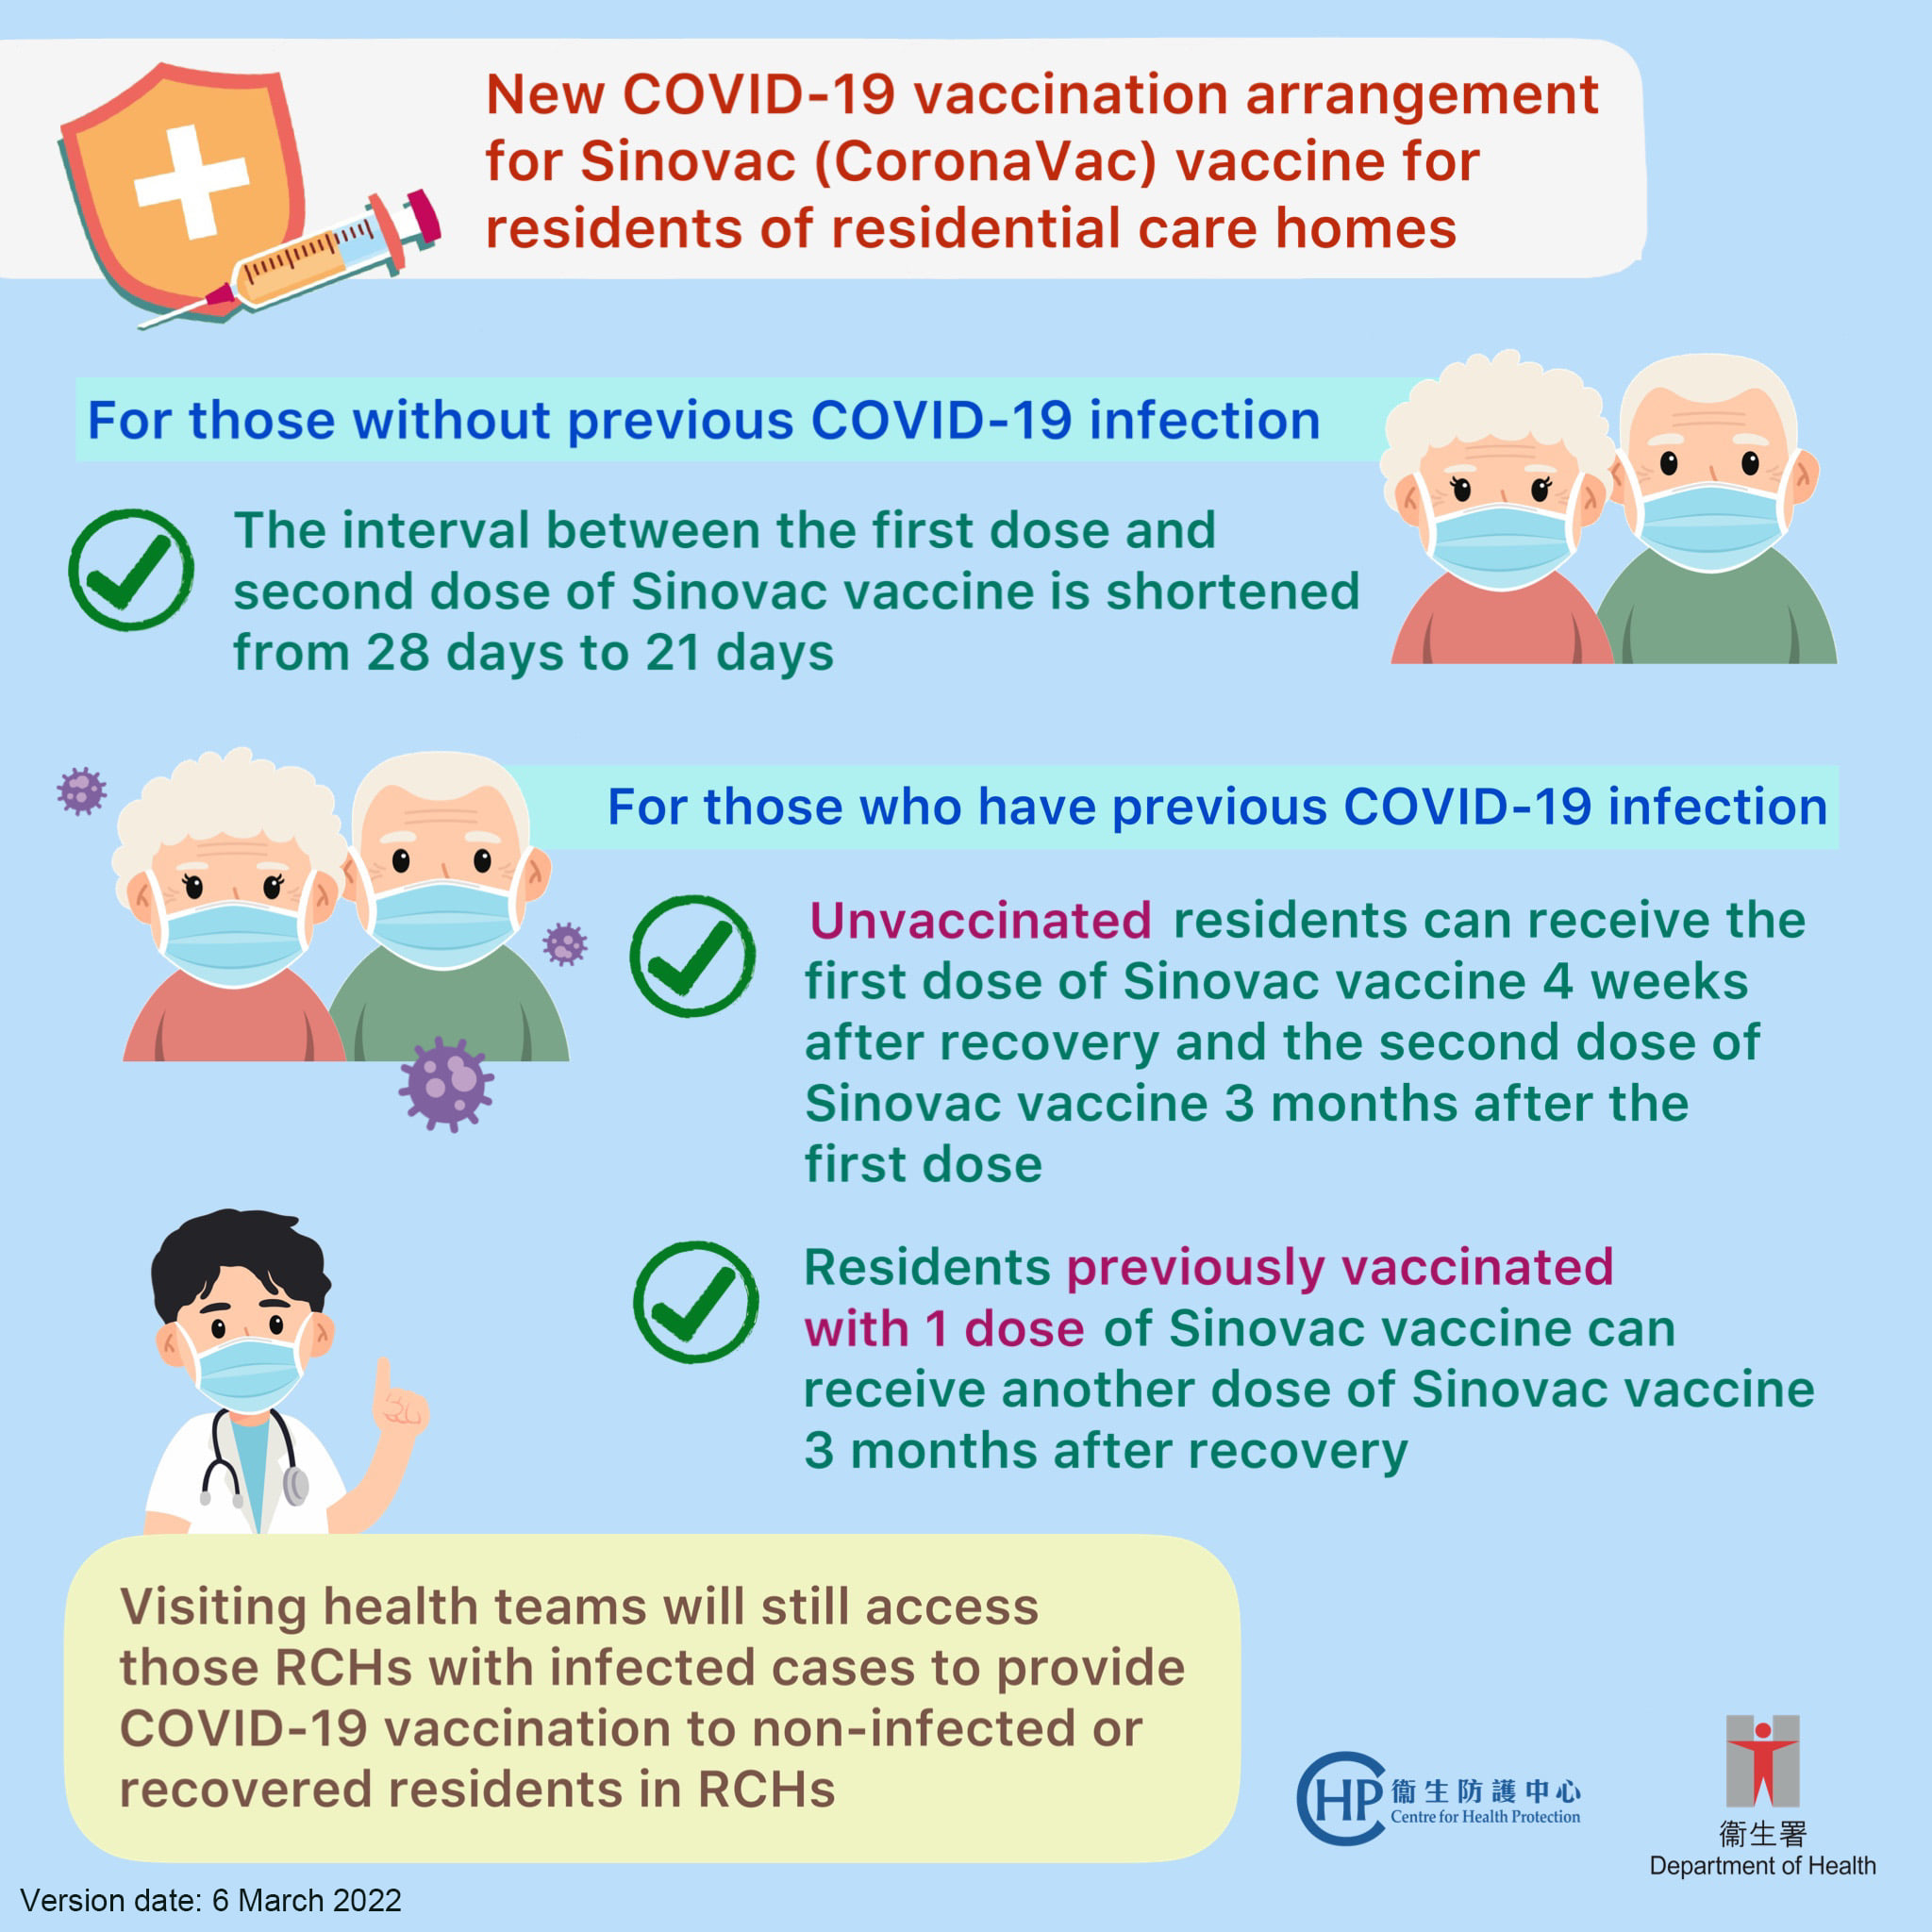 【New COVID-19 vaccination arrangement for Sinovac (CoronaVac) vaccine for residents of residential care homes 】